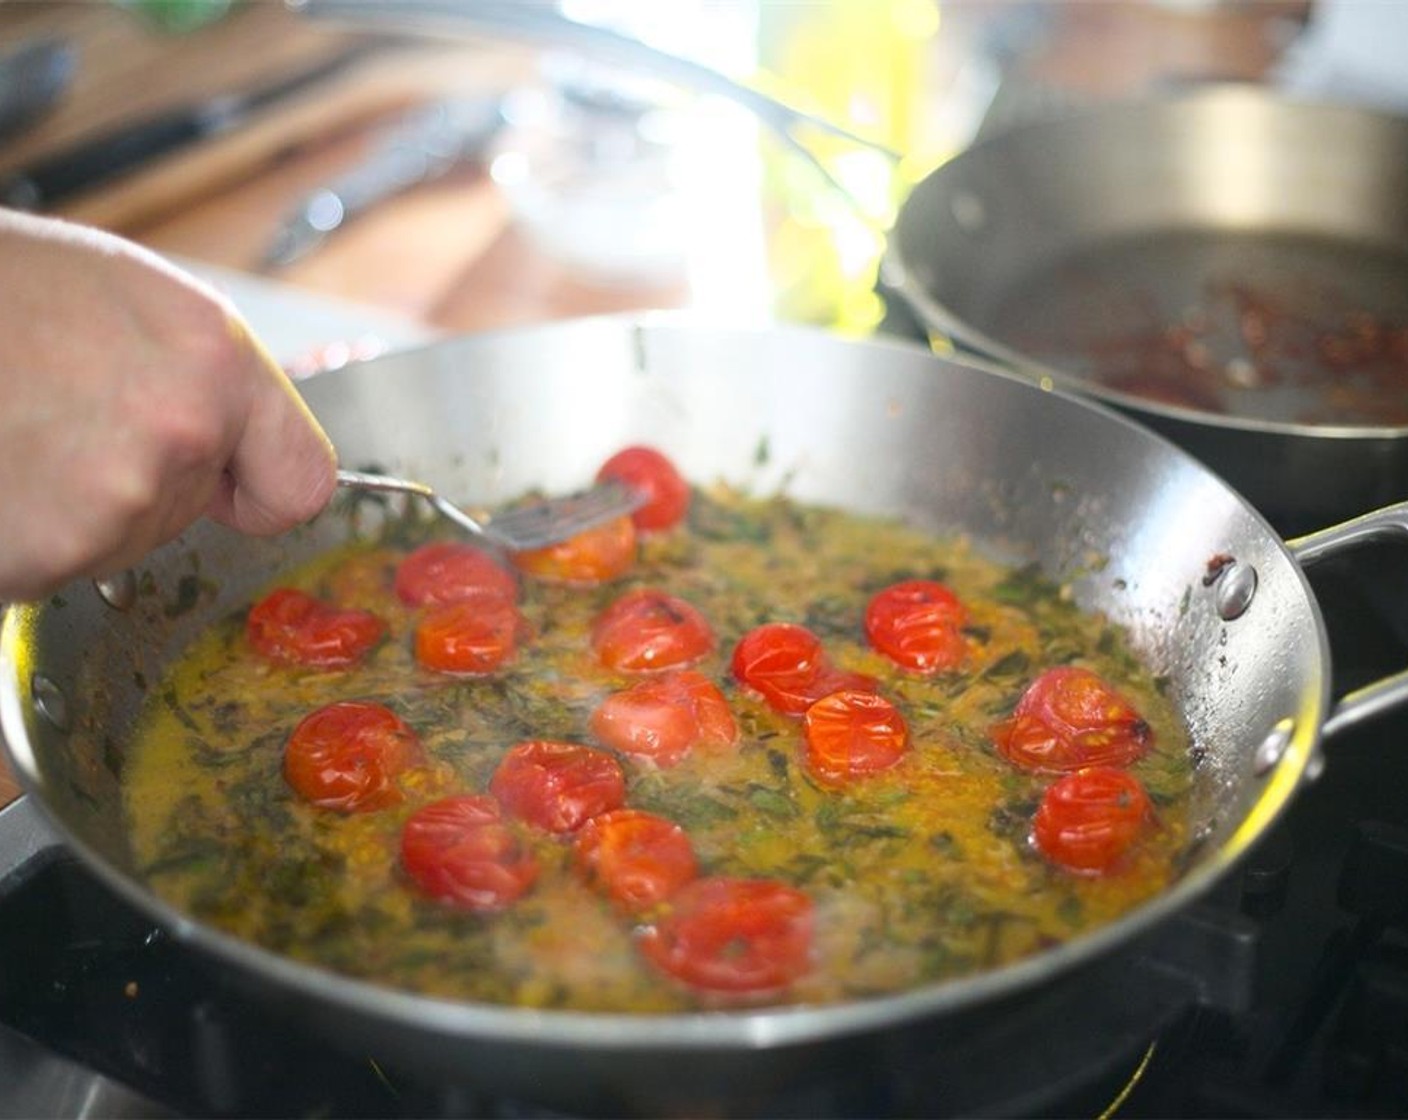 step 14 Cook for three minutes or until tomatoes begin to blister and pop. Remove from heat and hold until plating.